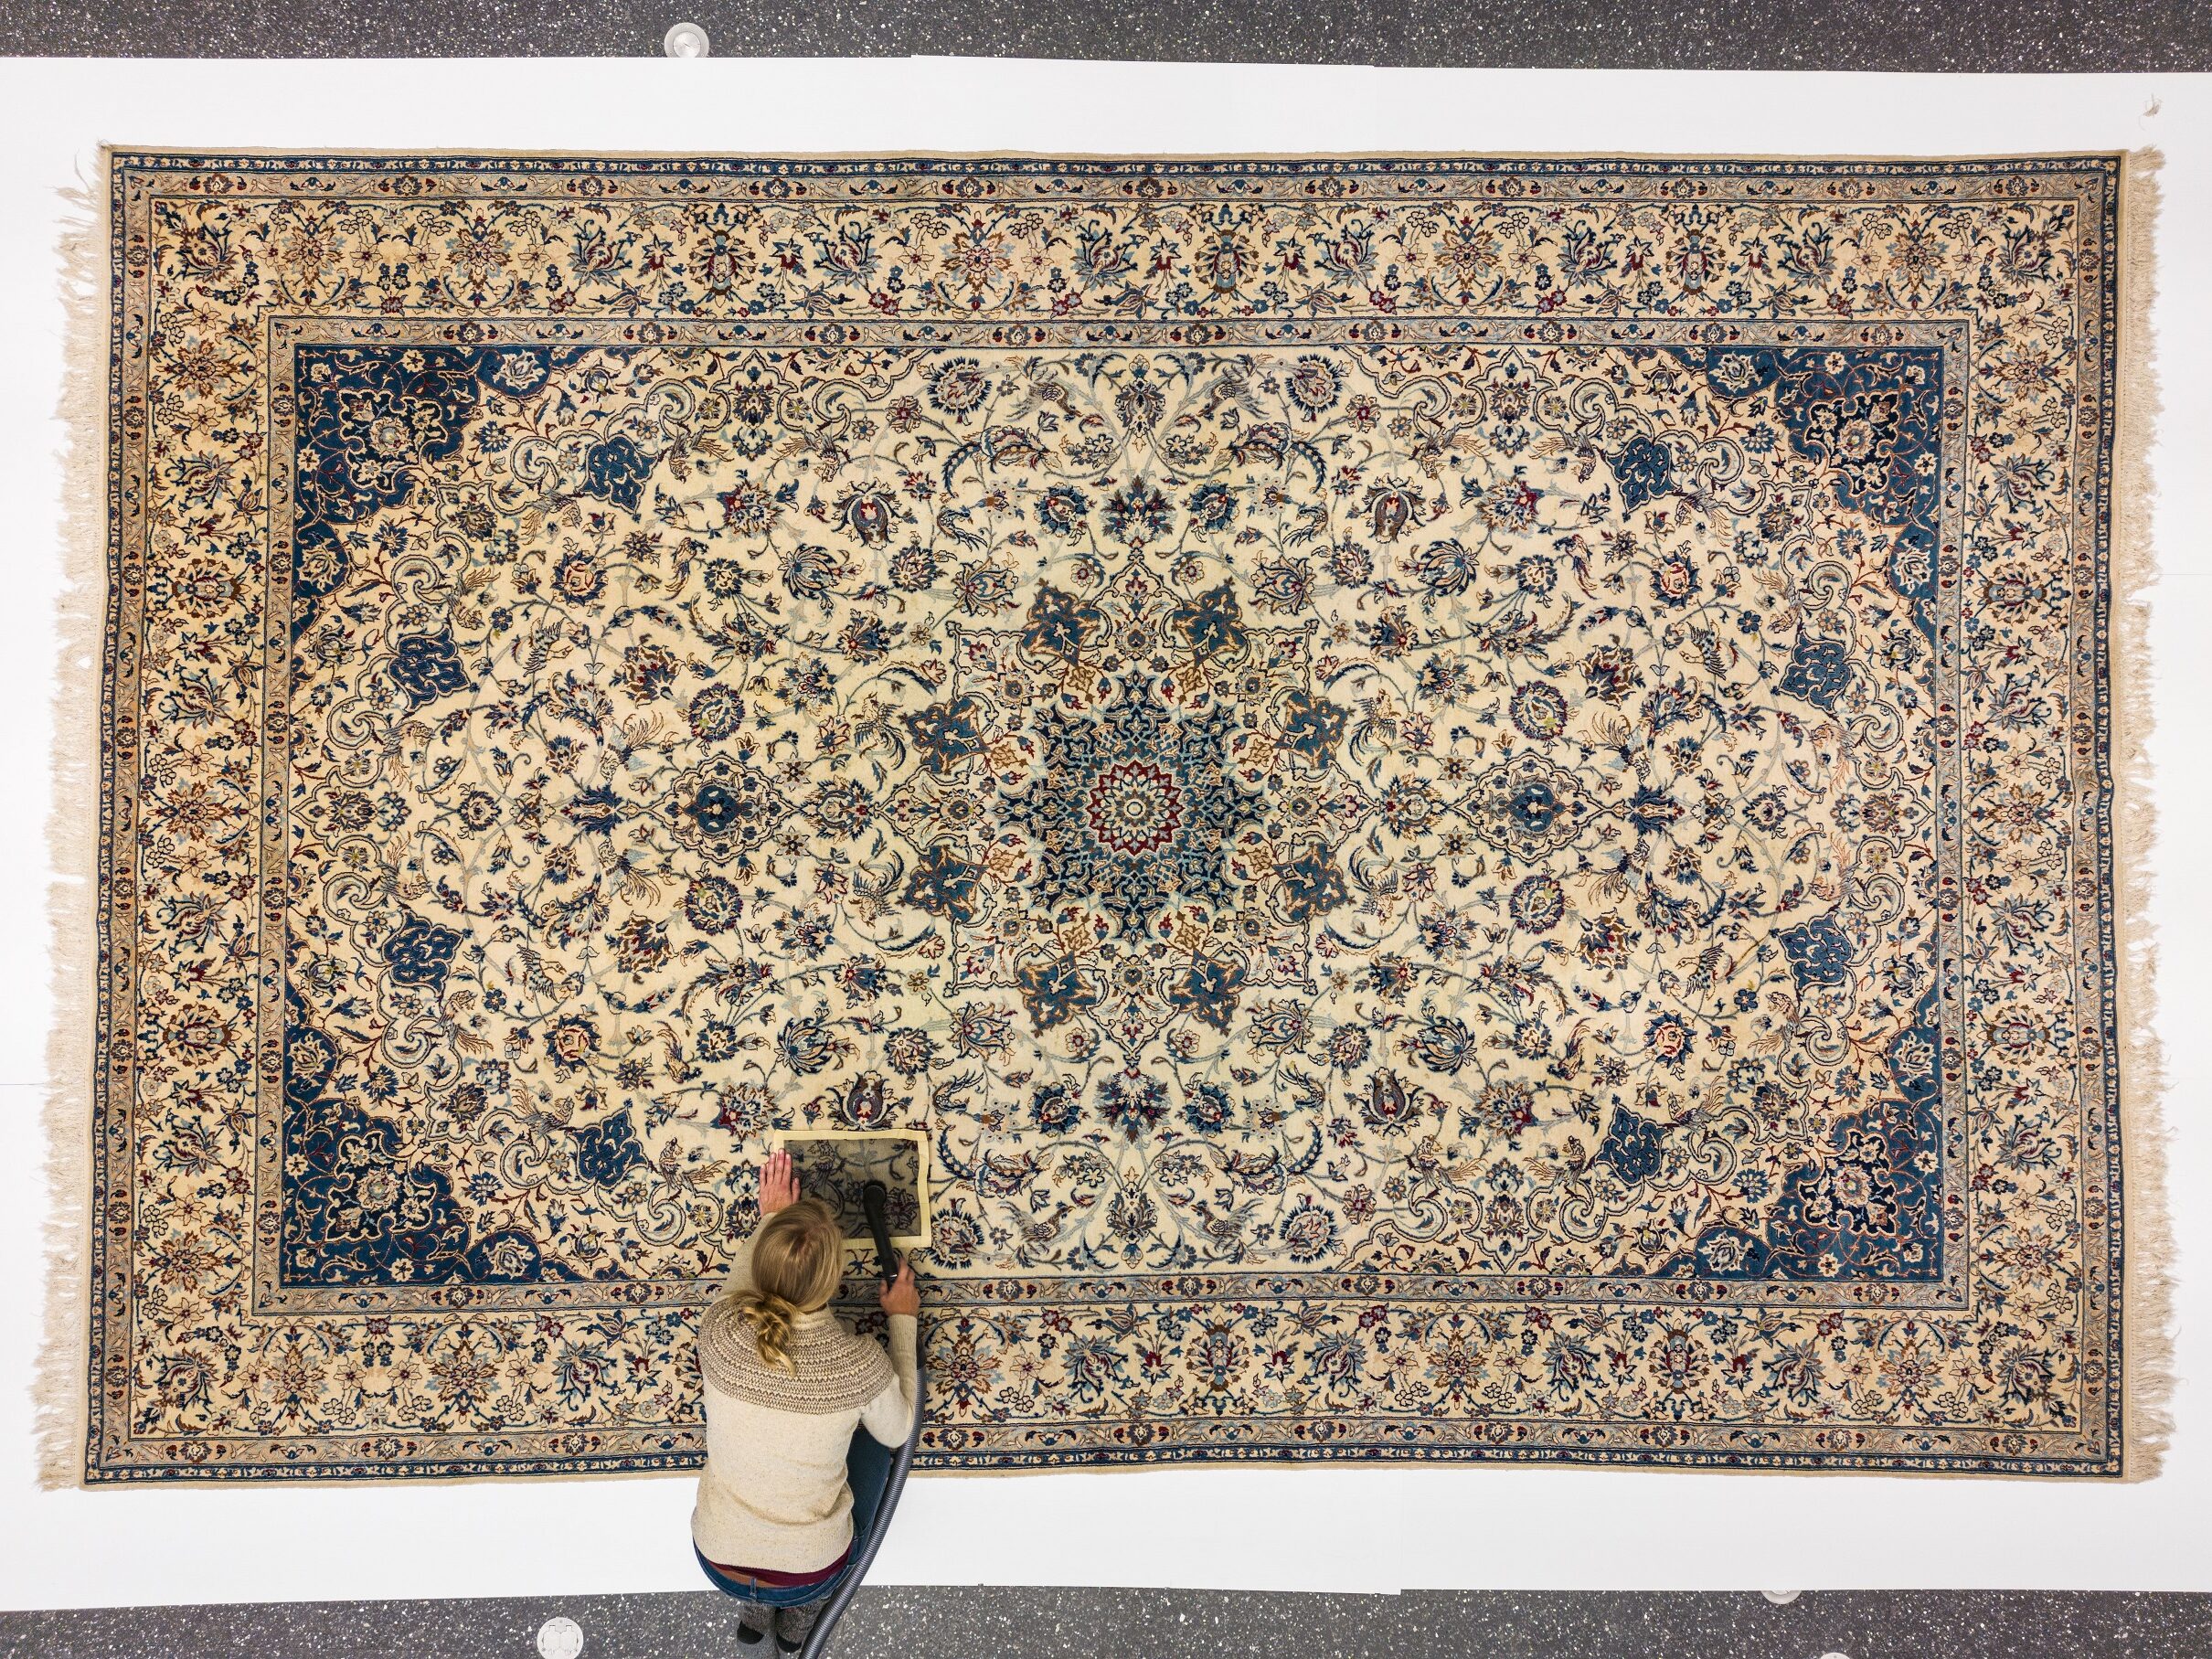 Photograph taken from above. The large Persian carpet has been laid out. Along the lower right edge the Museum conservator kneels, carefully vacuuming a section of carpet through a mesh screen.